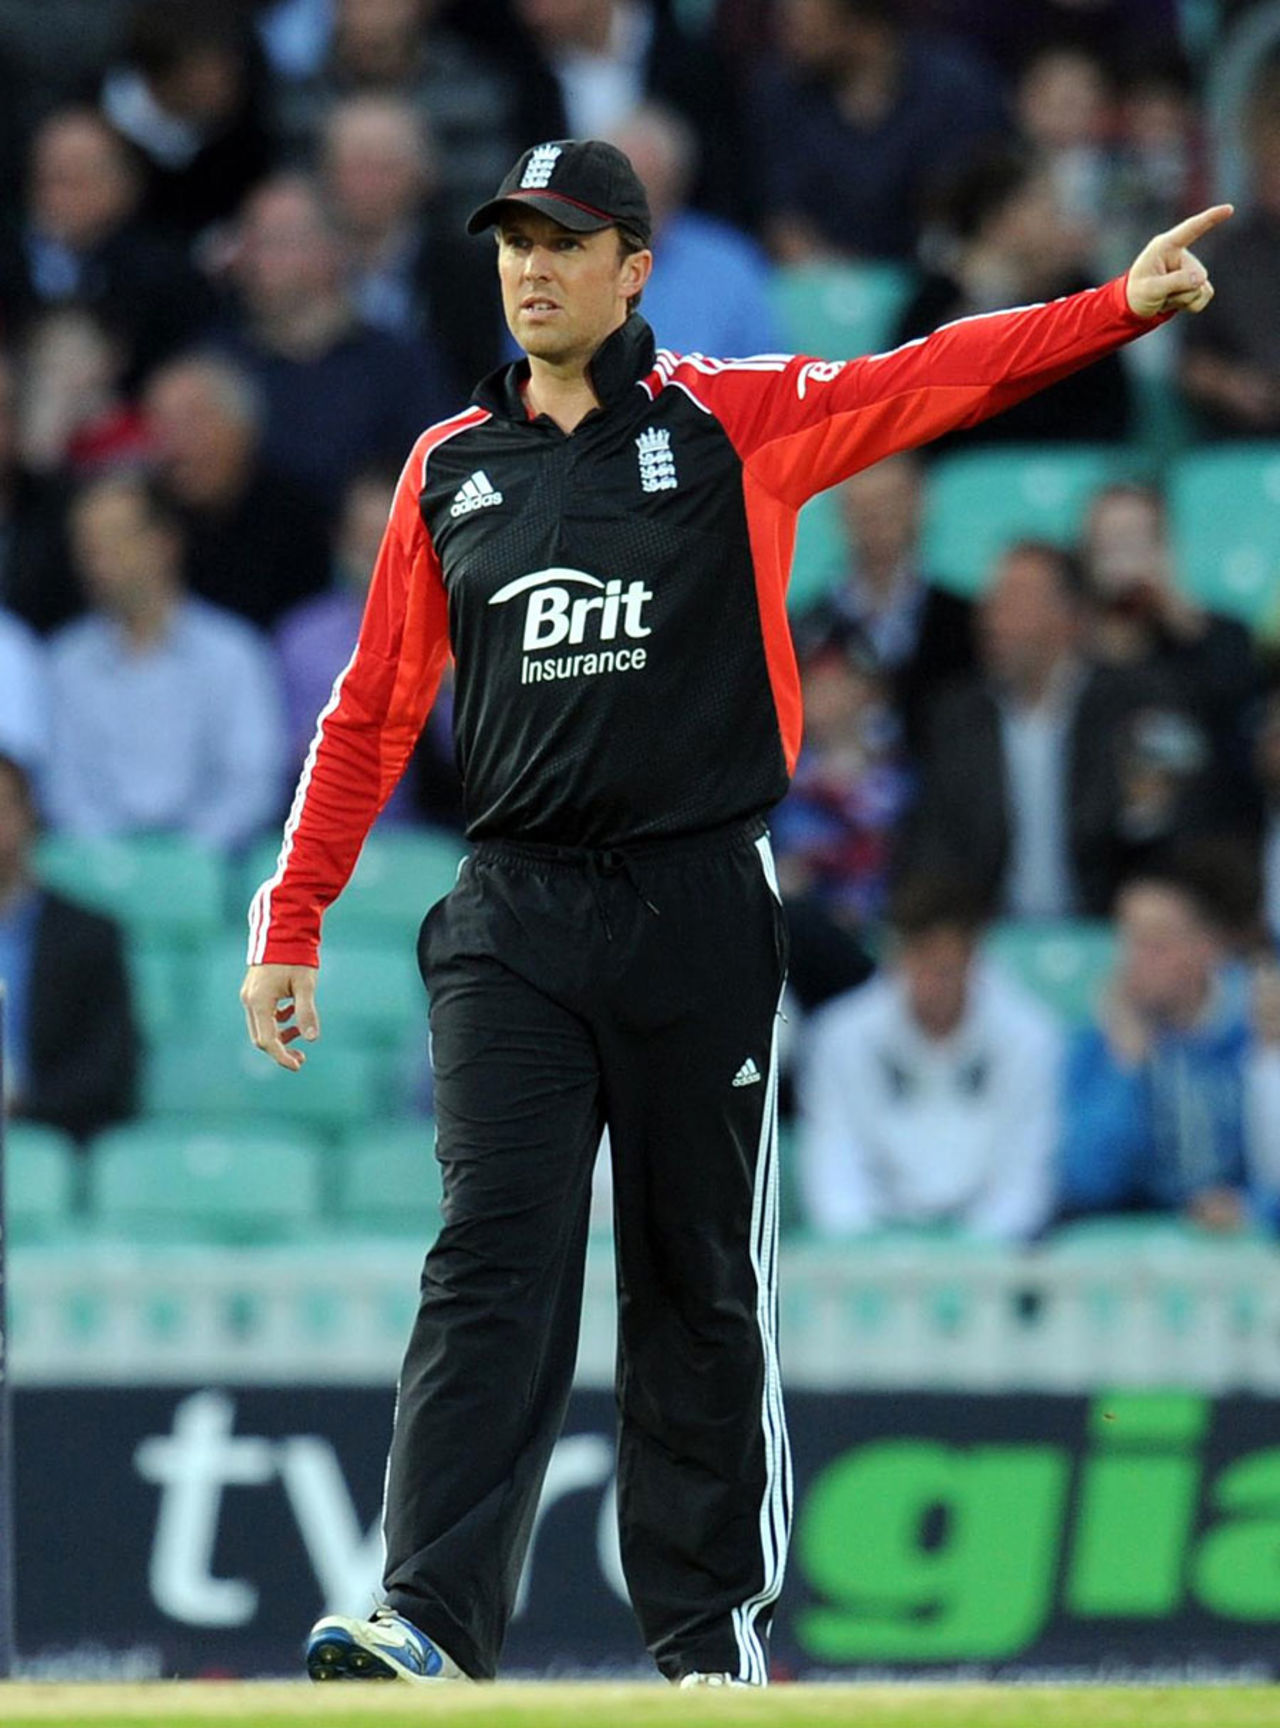 Graeme Swann led England well in the field, England v West Indies, 1st Twenty20, The Oval, September 23, 2011